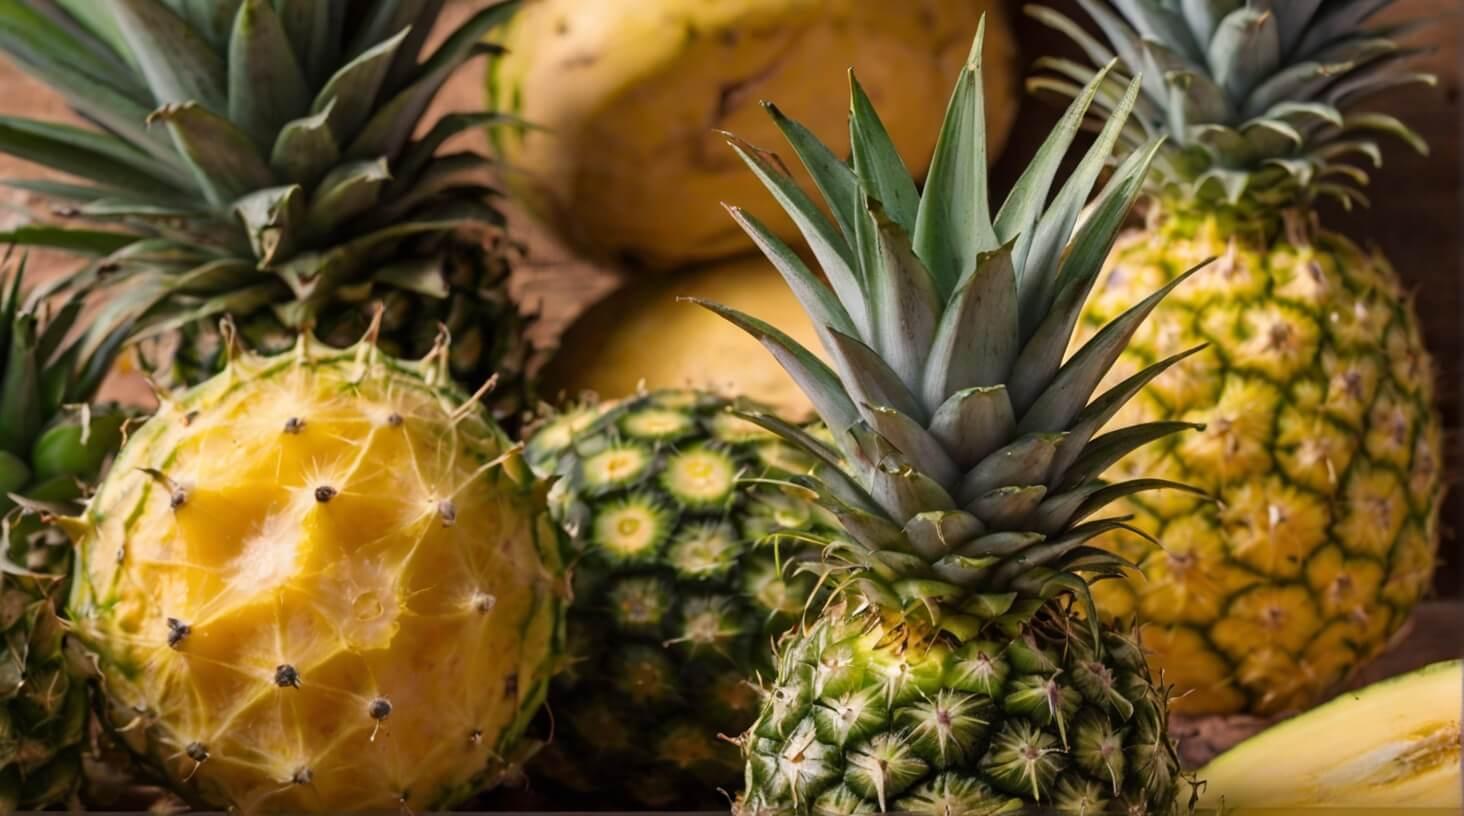 A close-up image of a pineapple, representing the potential benefits of bromelain, a compound found in pineapple with anti-inflammatory properties.